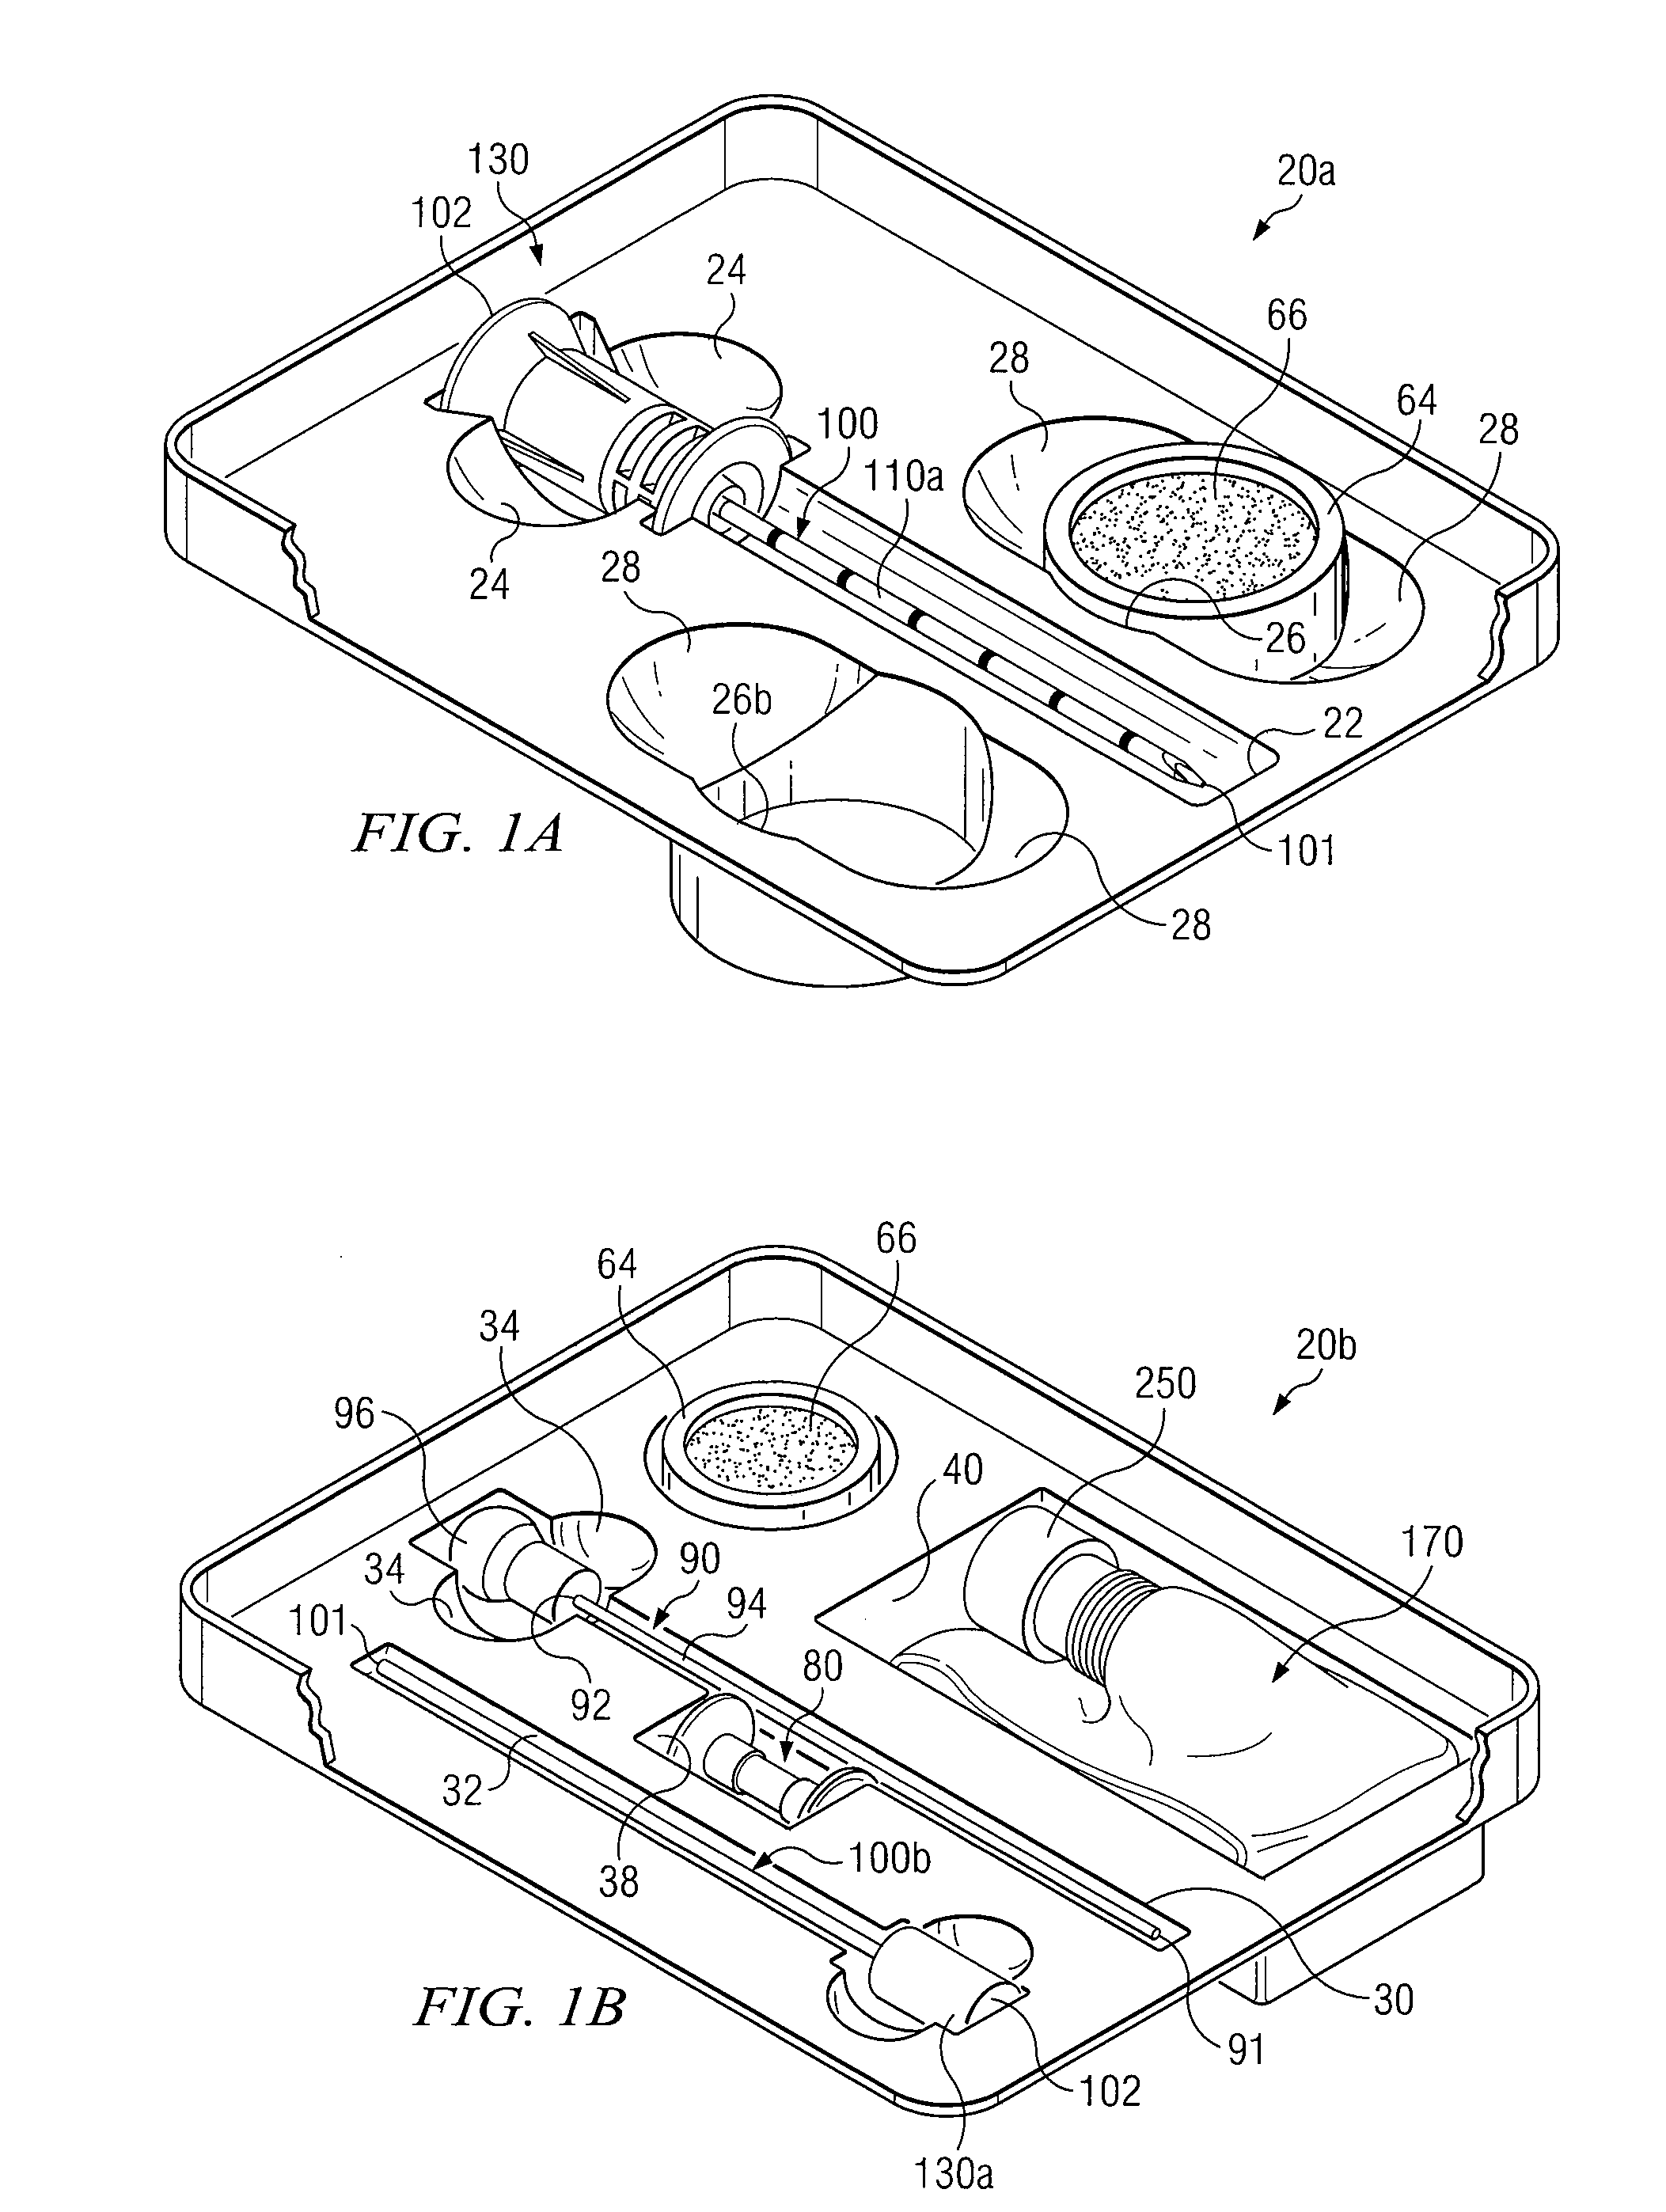 Bone Marrow Aspiration Devices and Related Methods